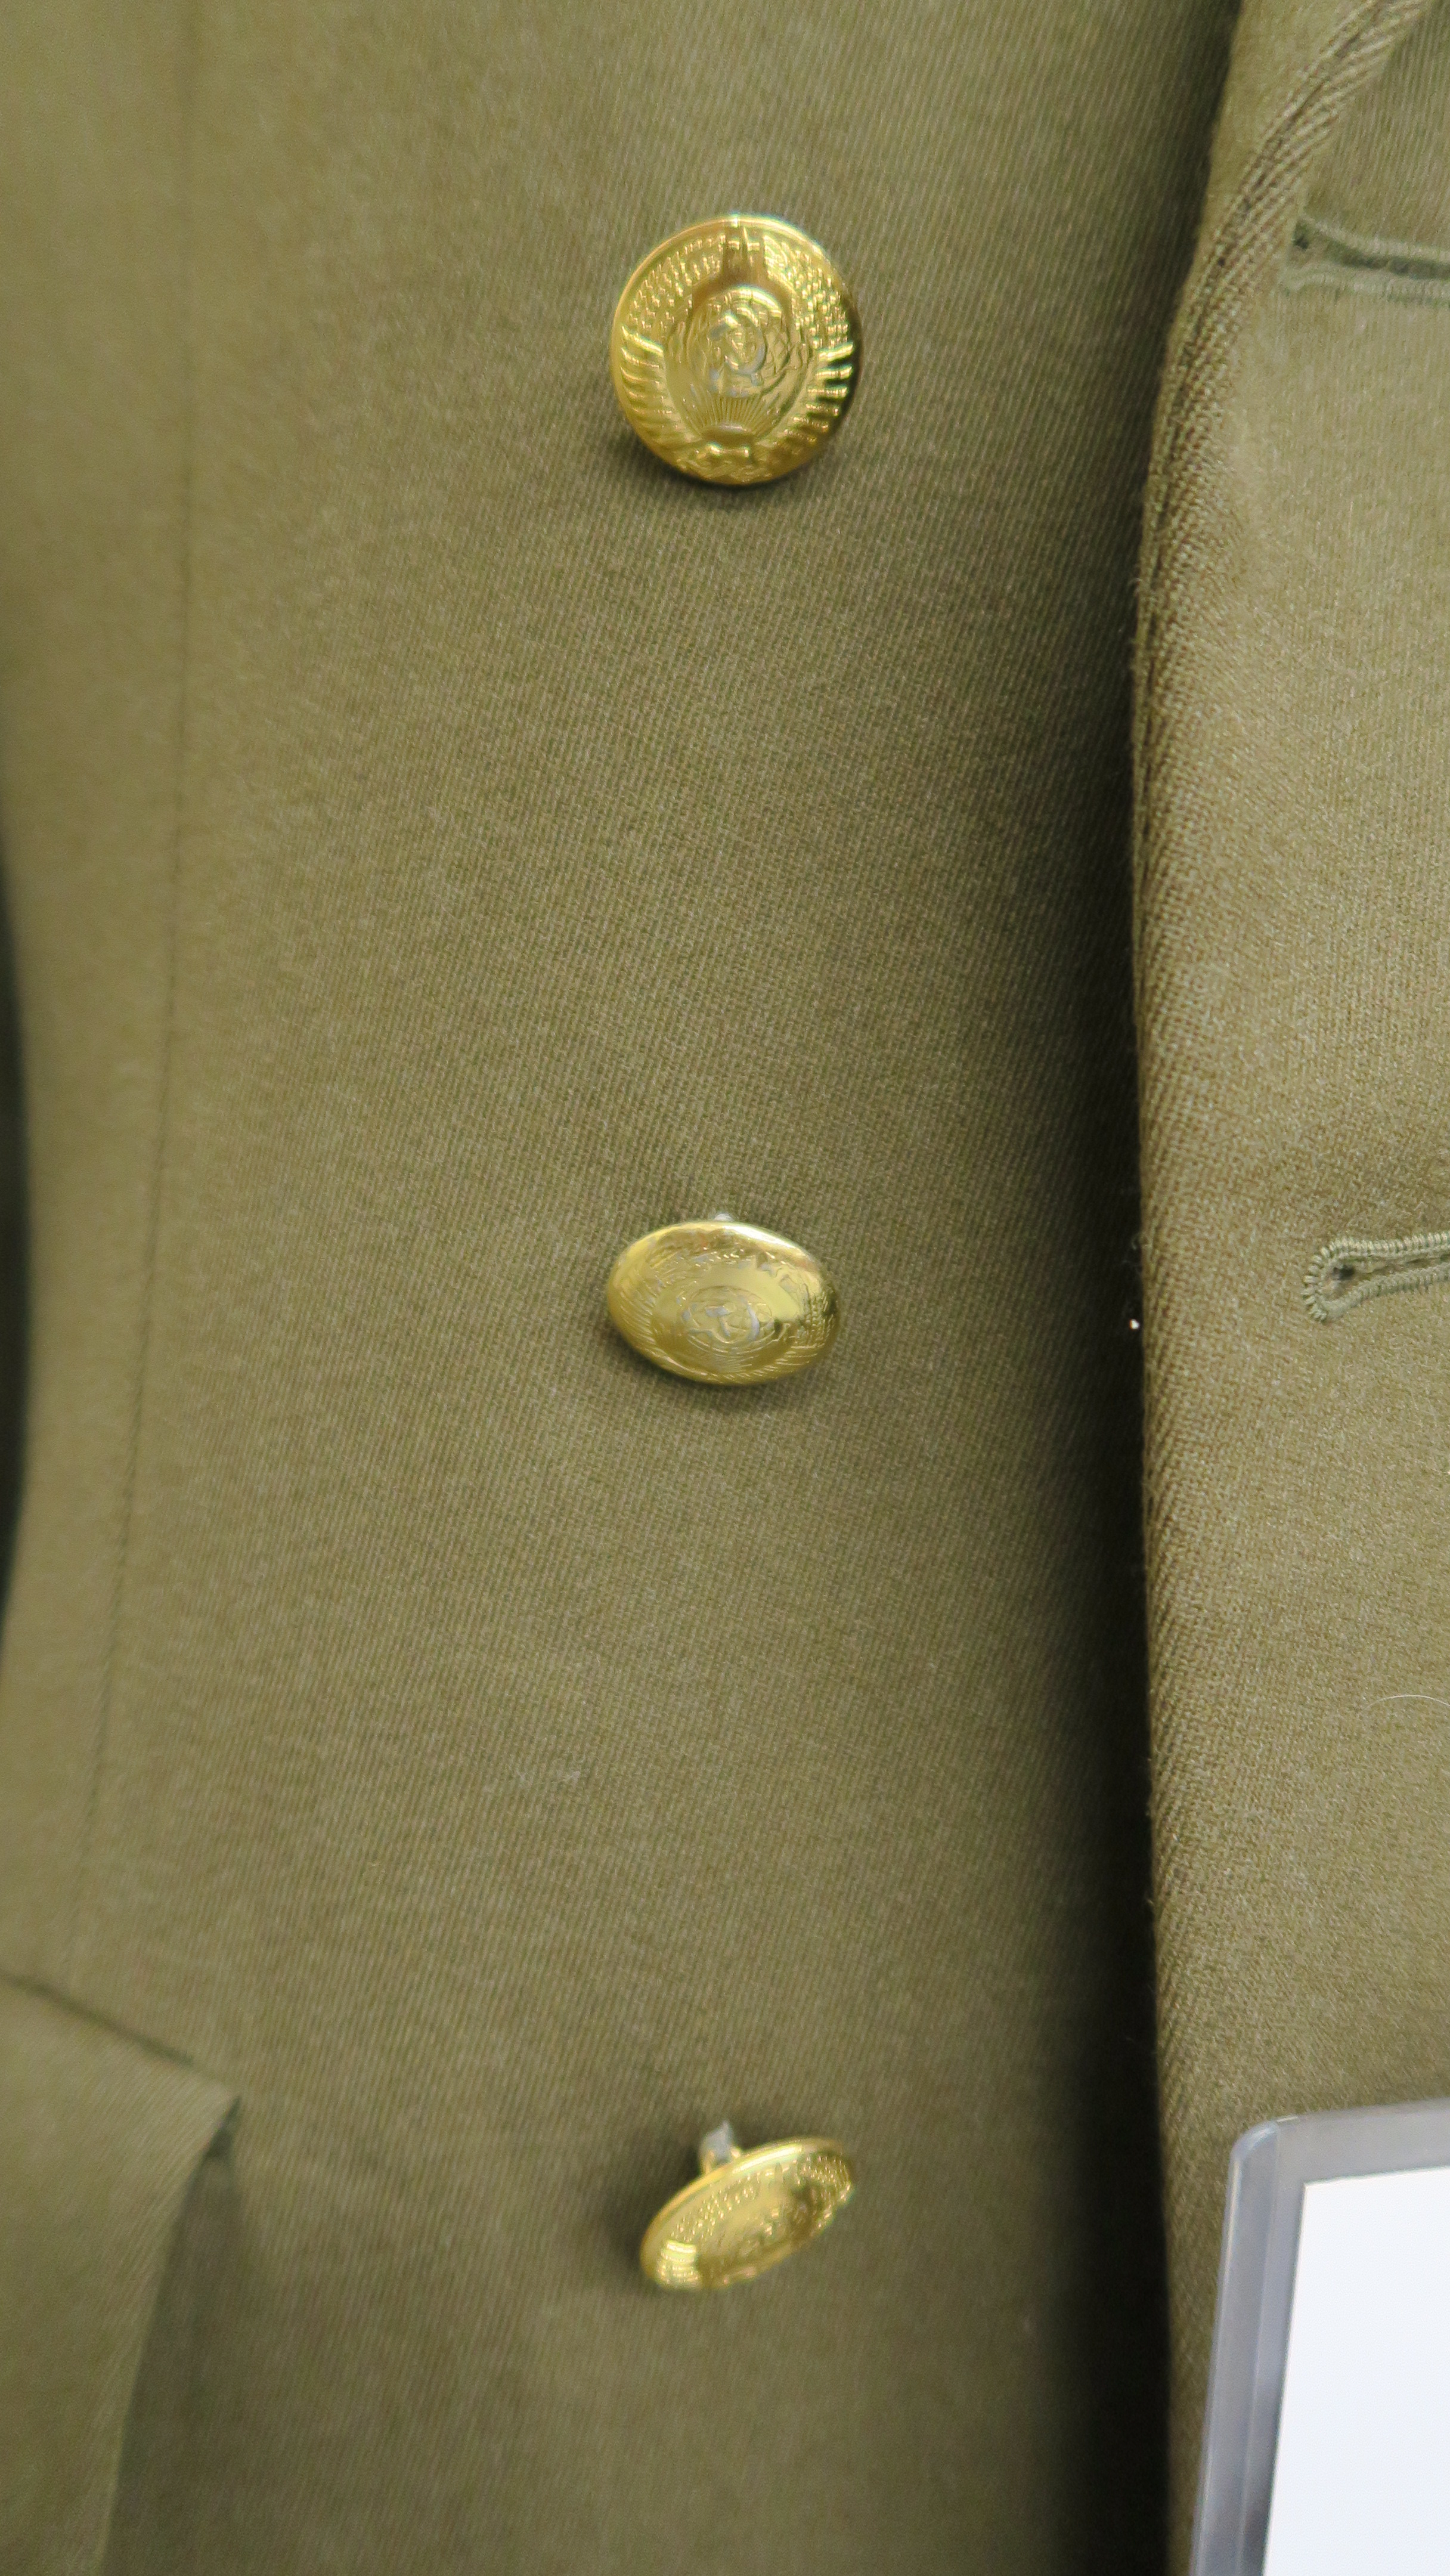 James Bond "Goldeneye" (1995) Russian Army tunic worn by Gottfried Johns as General Ouromov - Image 5 of 15